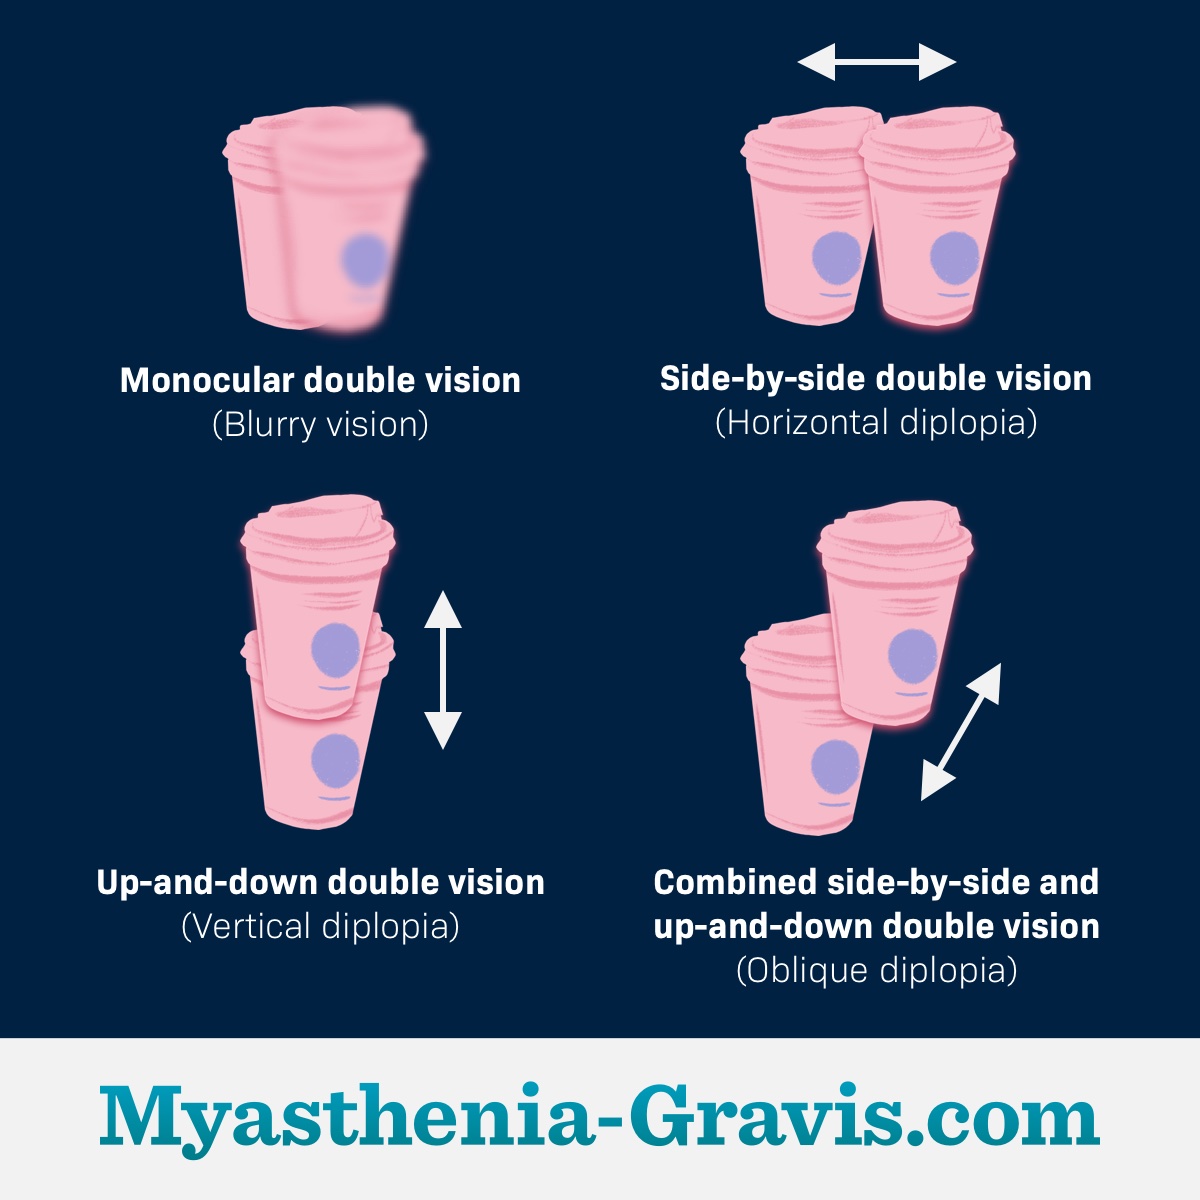 Different types of diplopia or double vision in myasthenia gravis.